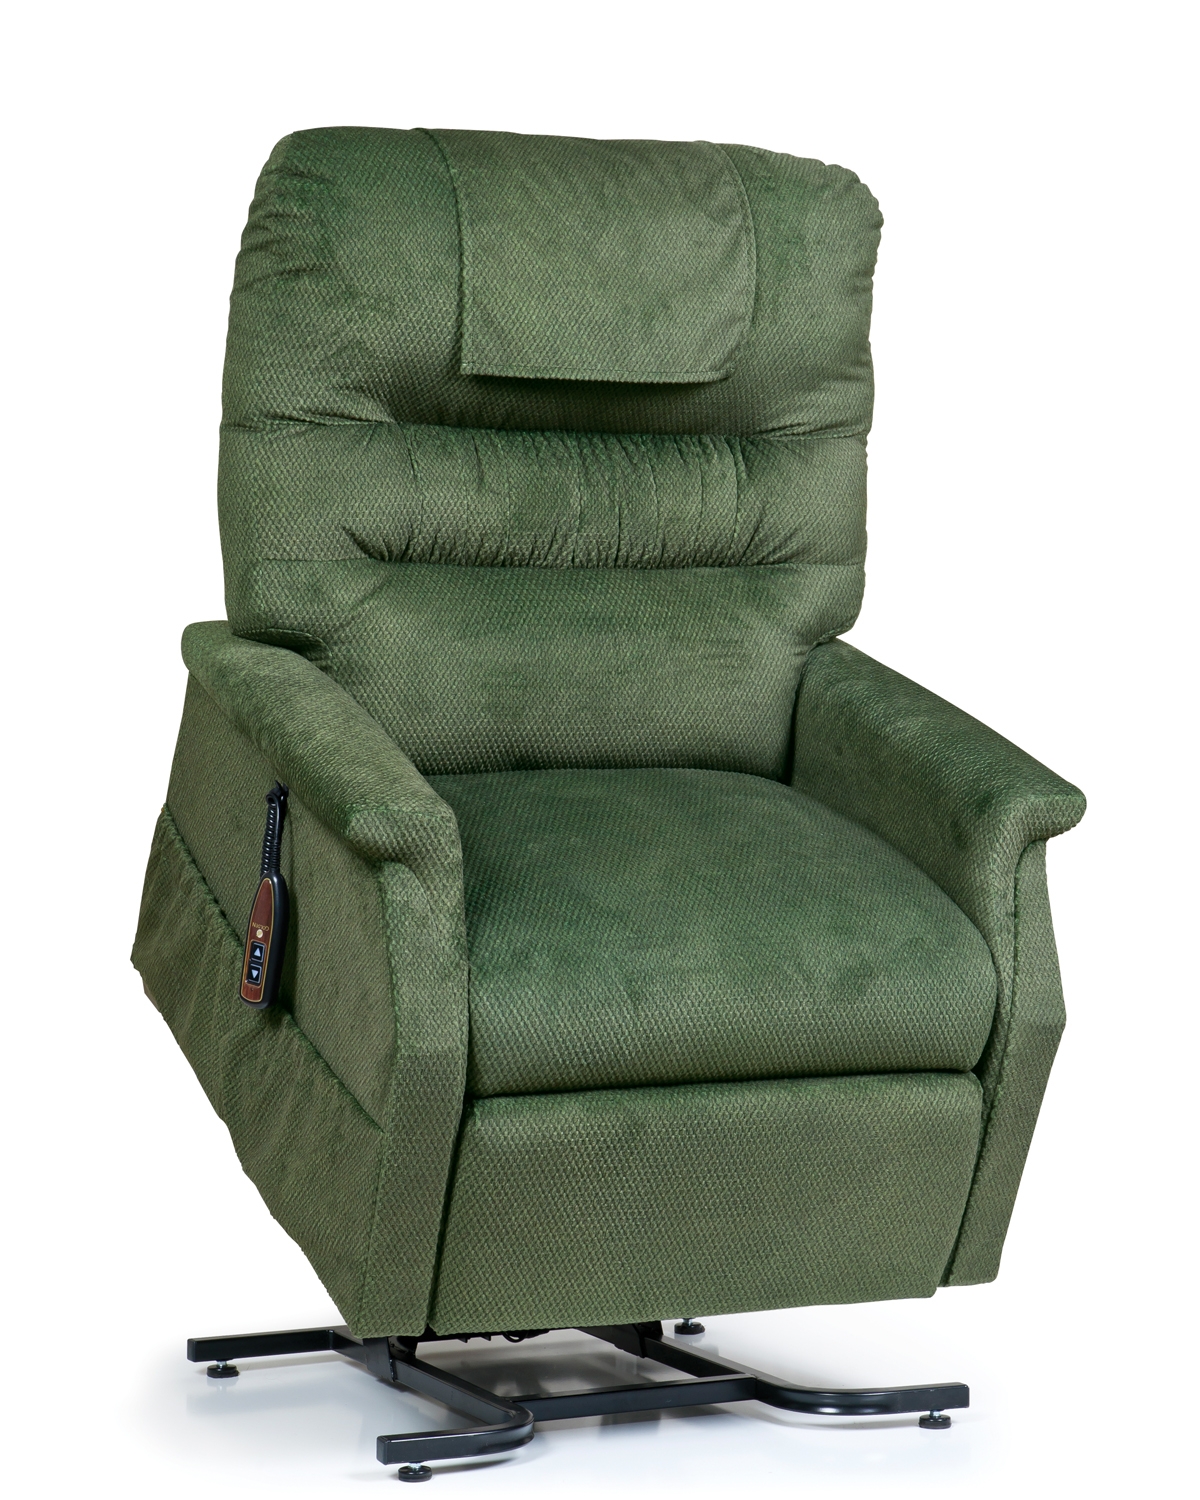 Photo of Golden Technologies Monarch Lift Chair, Size Large